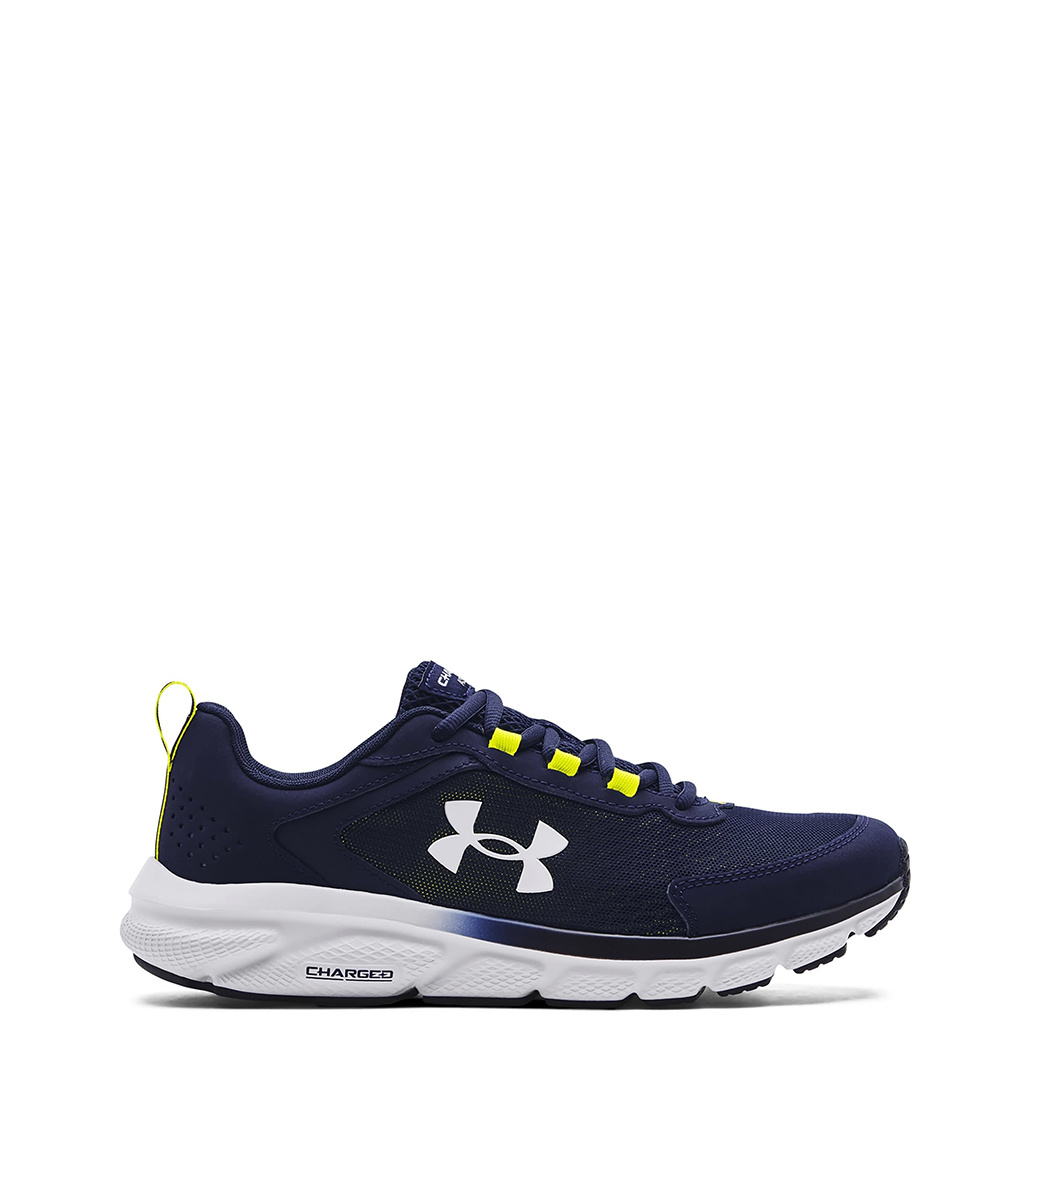 UNDER ARMOUR CHARGED ASSERT 9 NAVY/YELLOW - Laura-Jo Shoes